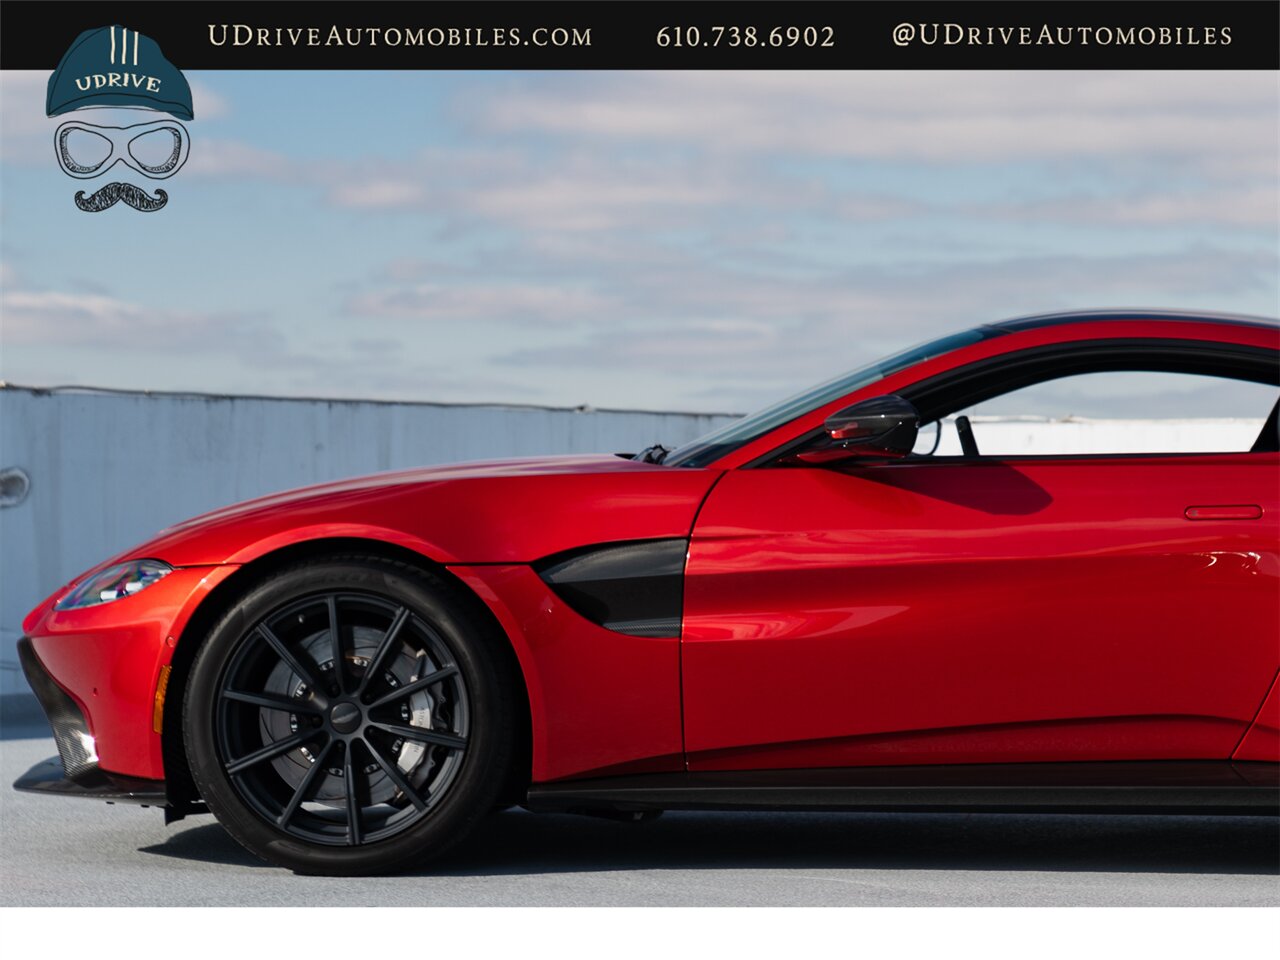 2019 Aston Martin Vantage  Incredibly Spec Rare Q Exclusive Fiamma Red $222k MSRP 1 of a Kind CPO - Photo 10 - West Chester, PA 19382